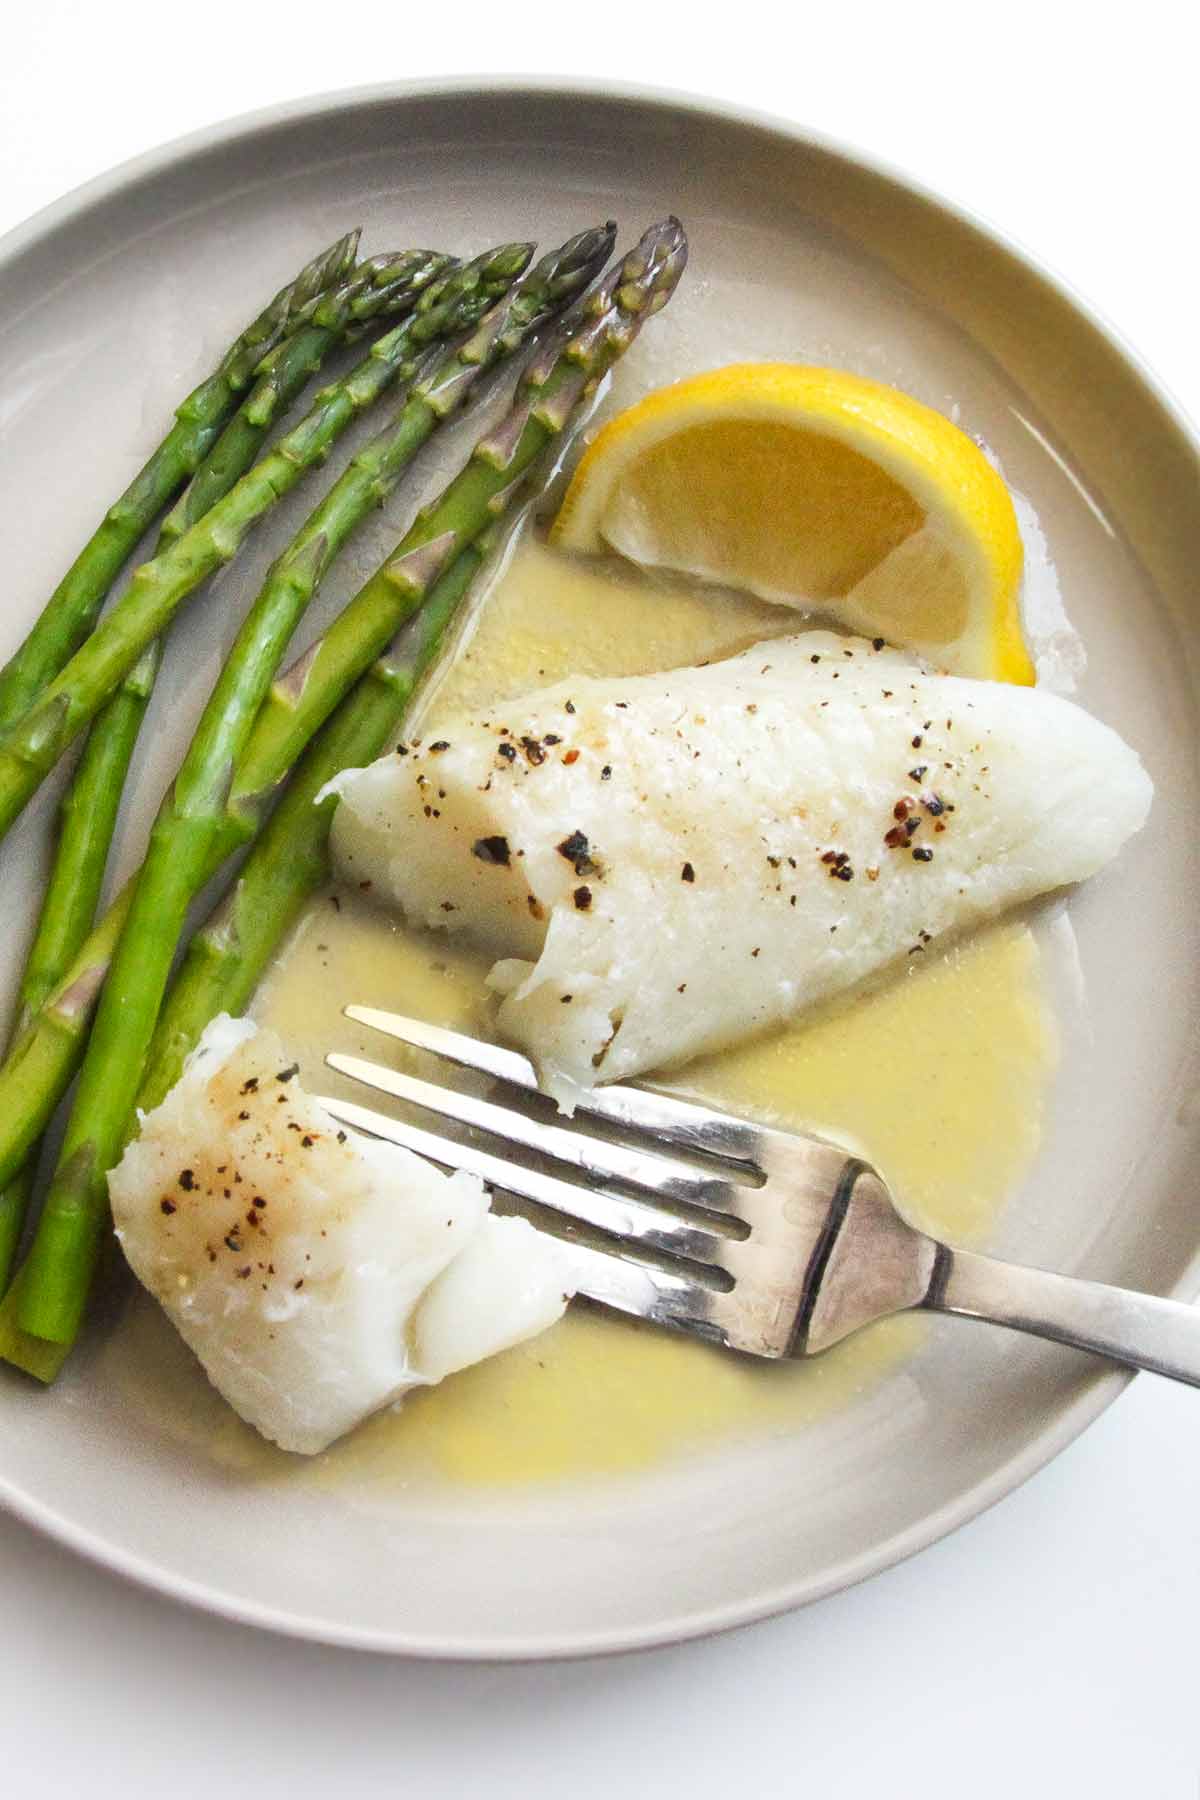 A piece of baked fish on a plate with butter sauce, a lemon wedge, and some asparagus spears.